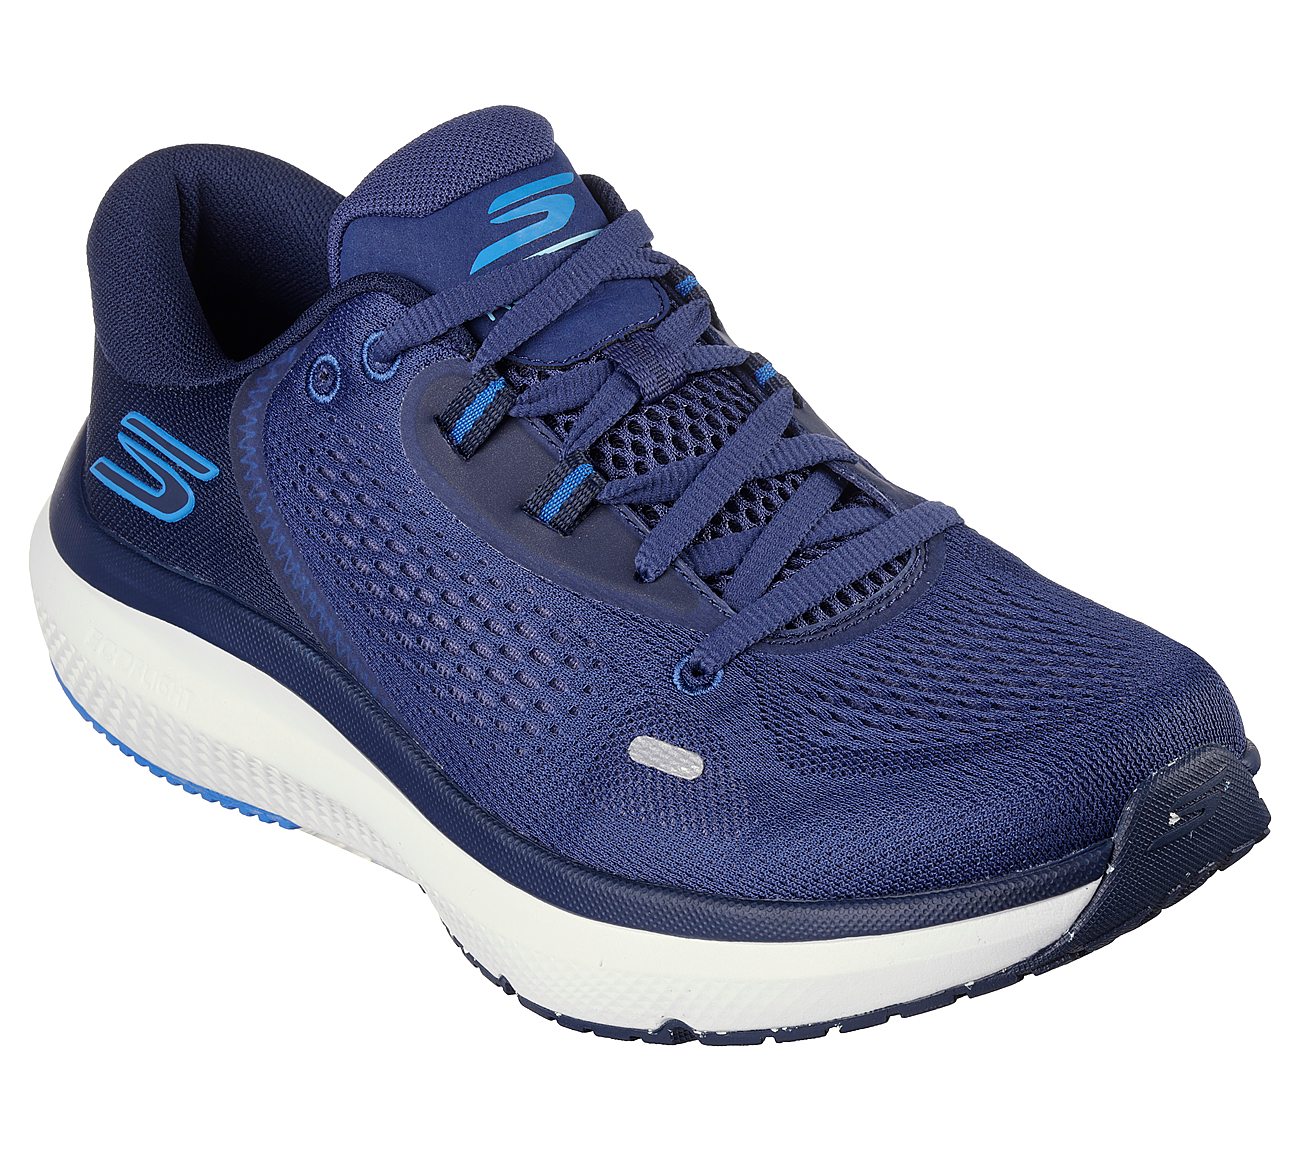 GO RUN PURE 4, NAVY/BLUE Footwear Right View